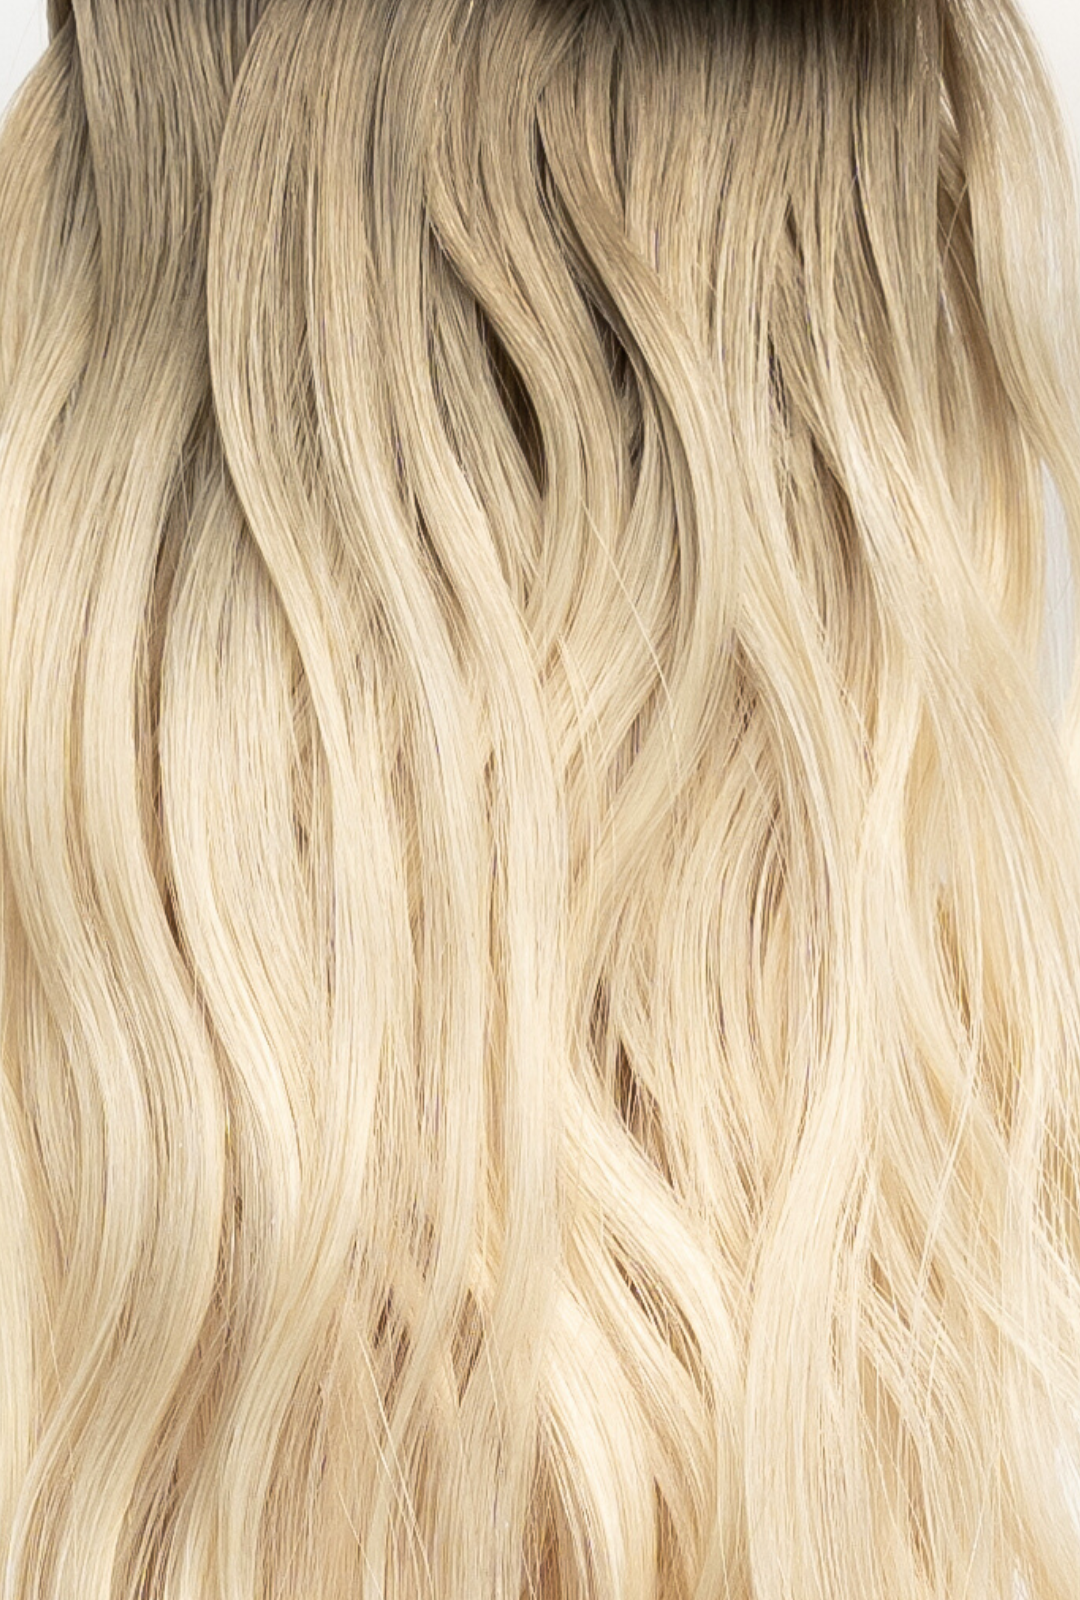 Waved by Laced Hair Machine Sewn Weft Extensions Rooted #8/60